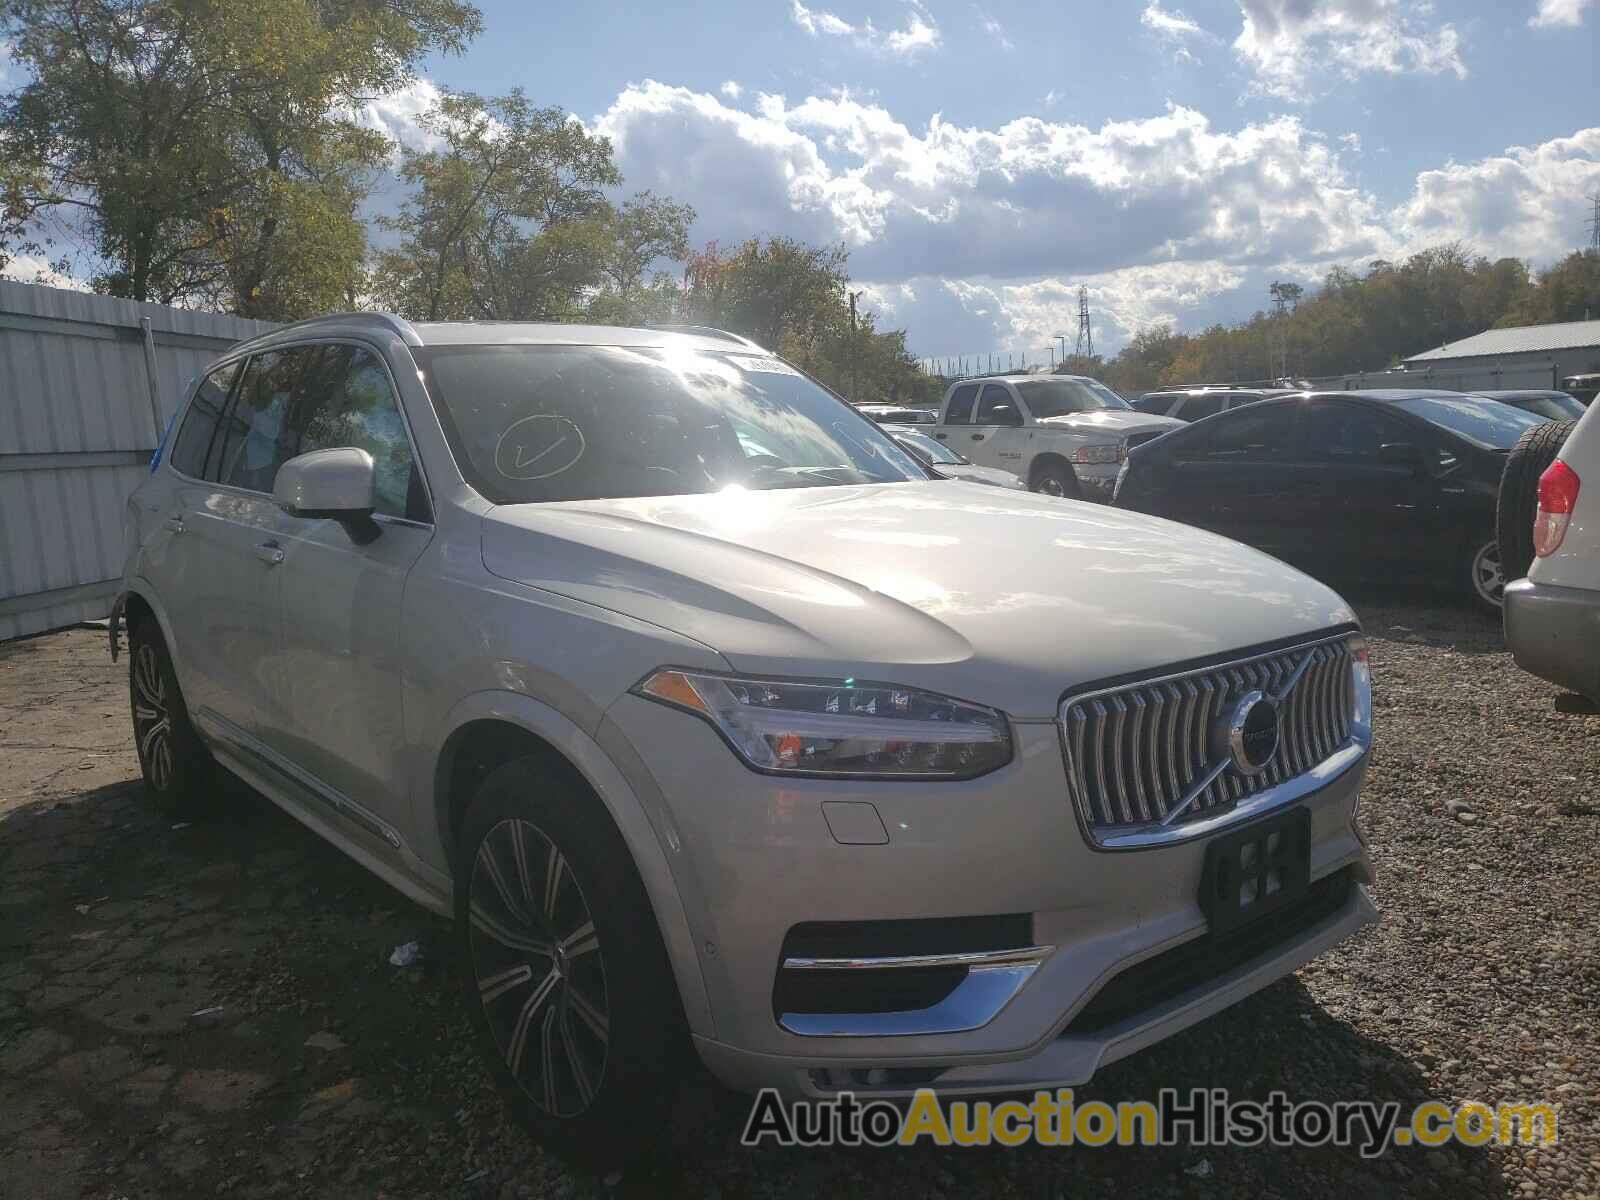 2020 VOLVO XC90 T6 IN T6 INSCRIPTION, YV4A22PL2L1608379